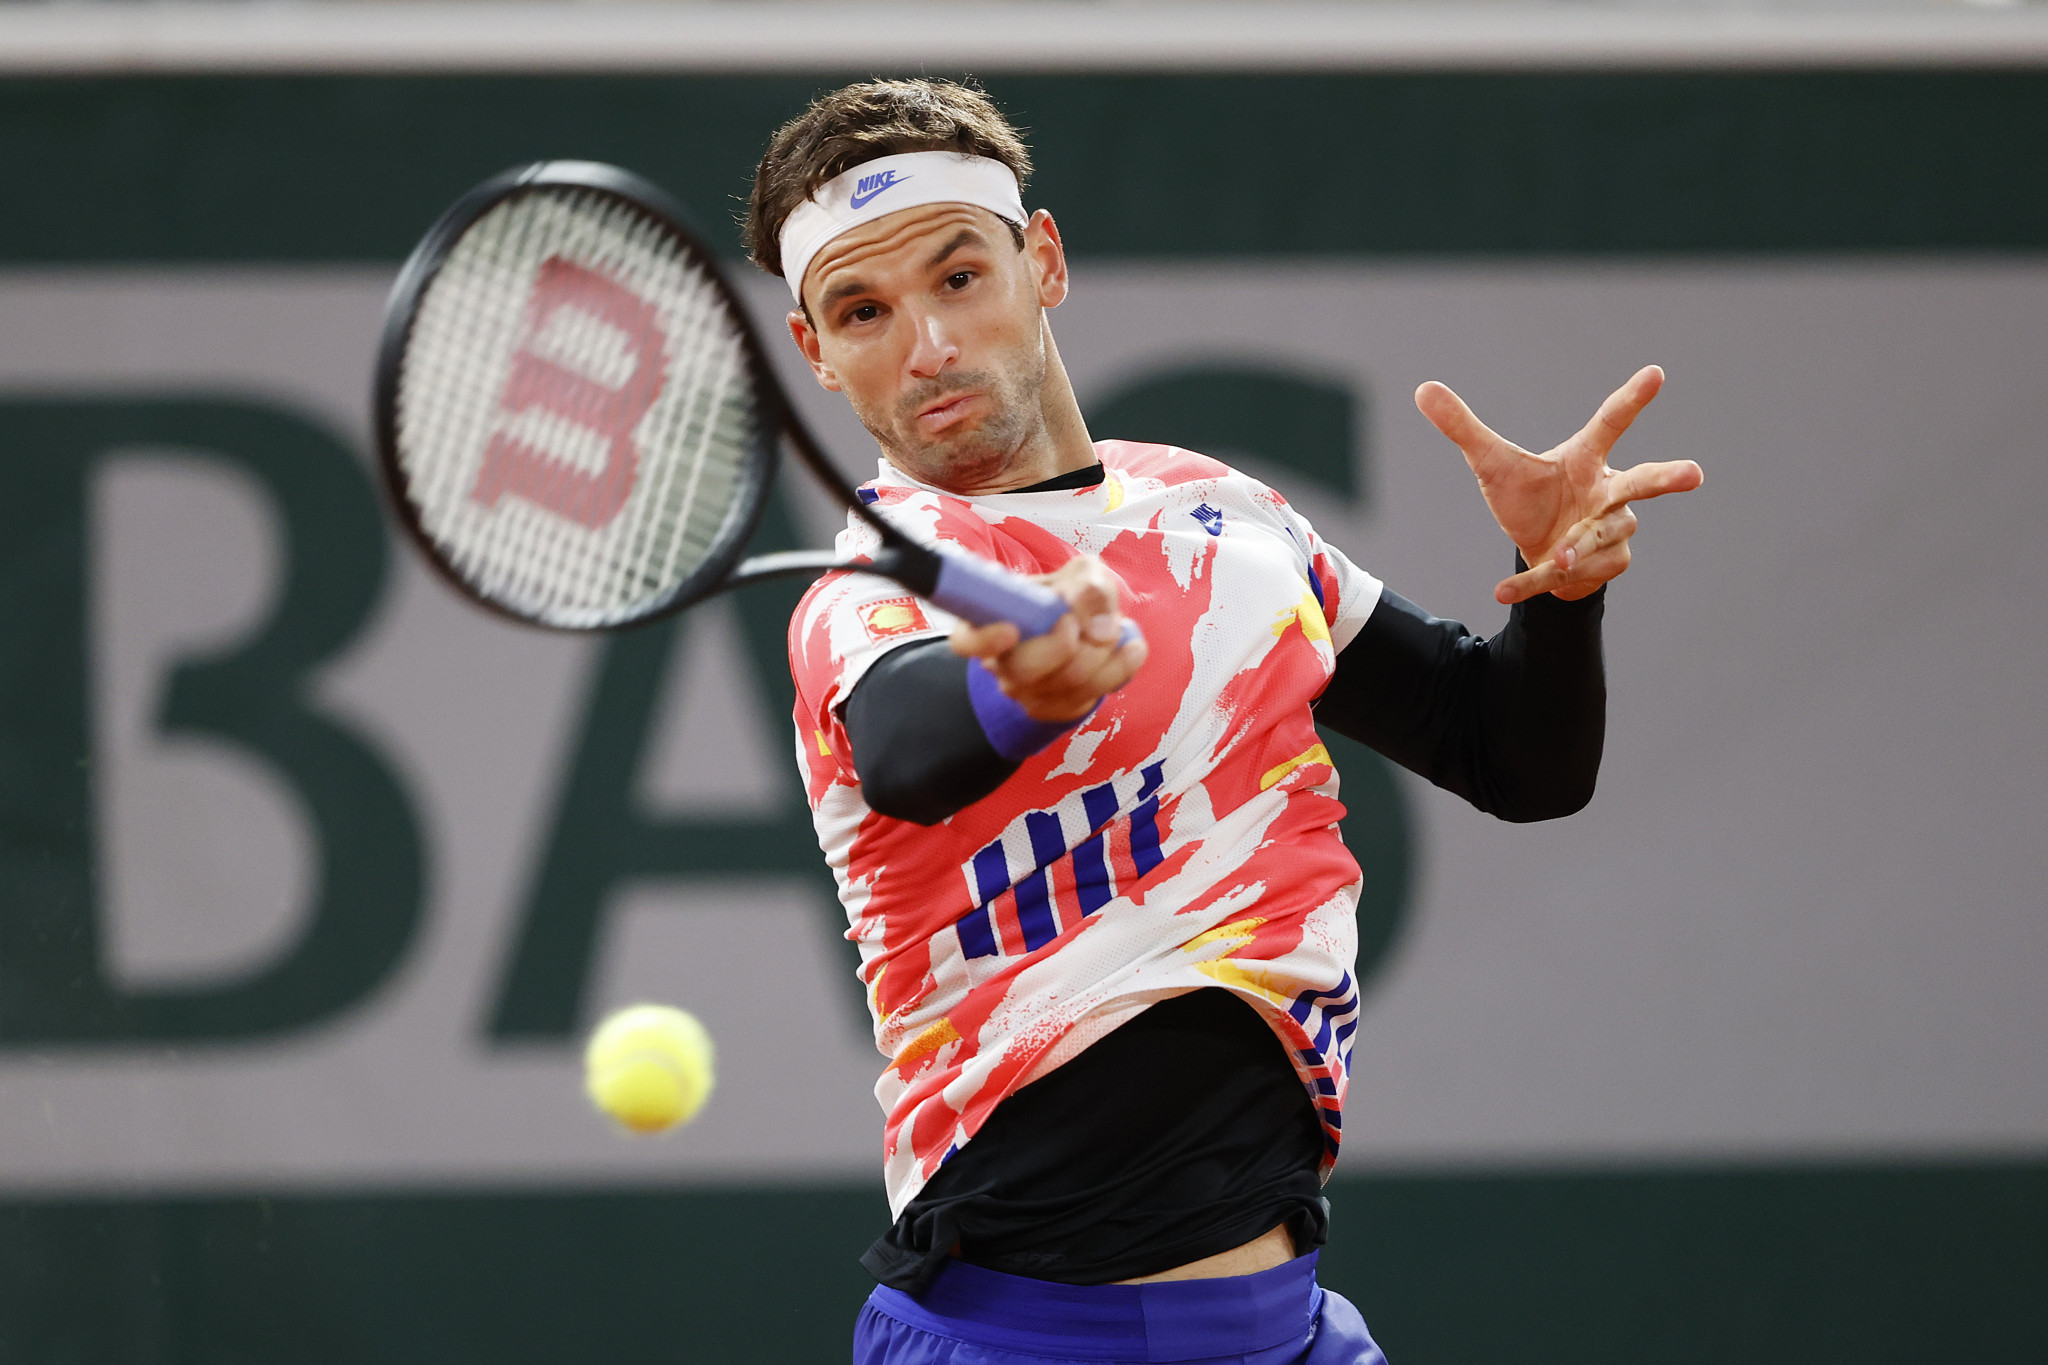 Grigor Dimitrov's French Open came to an end as he lost in straight sets to Stefanos Tsitsipas ©Getty Images